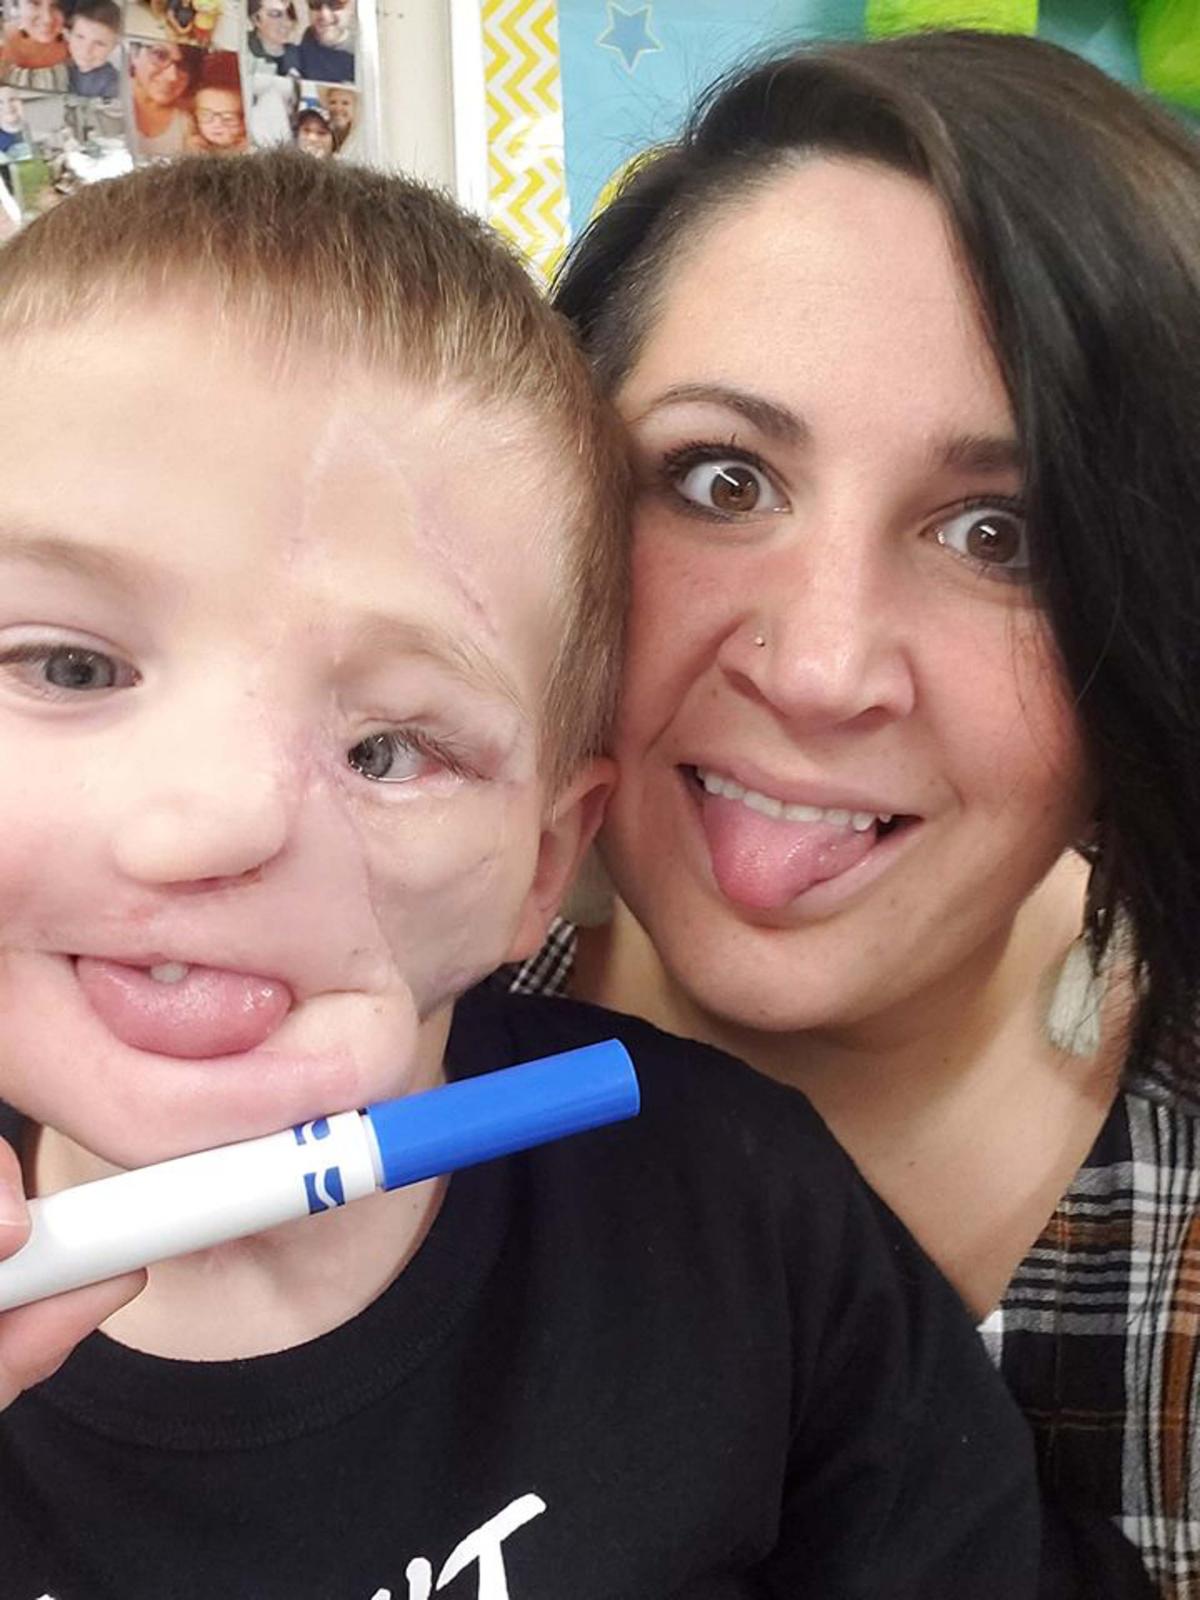 "He'll never look the same and we face a lot of obstacles," Brittany said. "The doctors said he would never be able to eat normally, he only has eight teeth now but he eats everything." (Caters News)